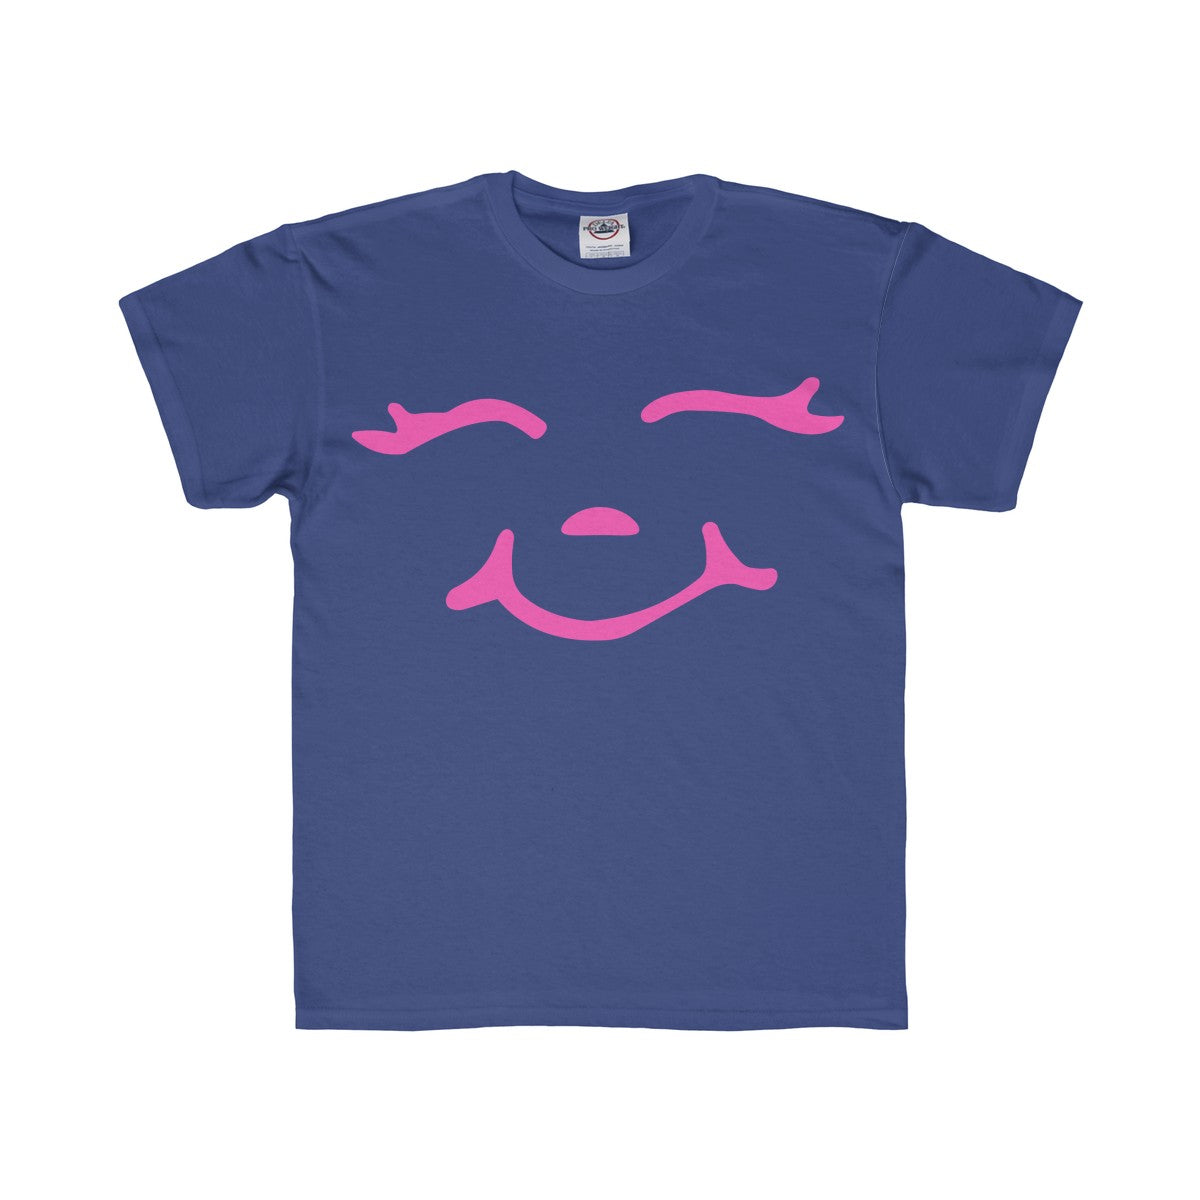 Cute Smile Youth Regular Fit Tee-Kids clothes-PureDesignTees